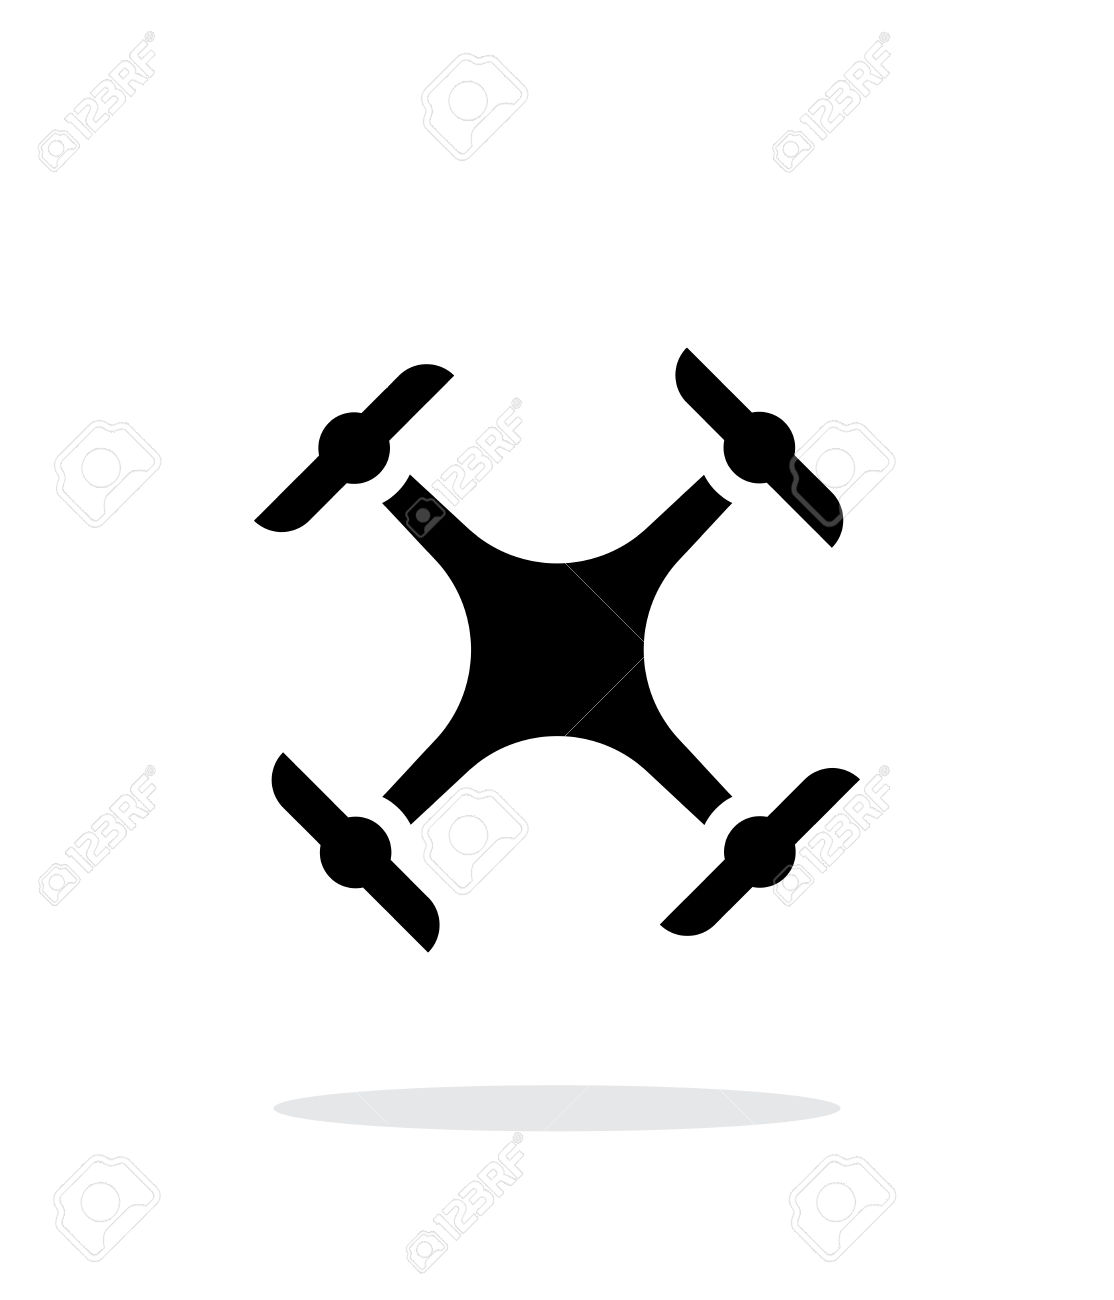 Quadcopter Drone Simple Icon On White Background. Royalty Free.